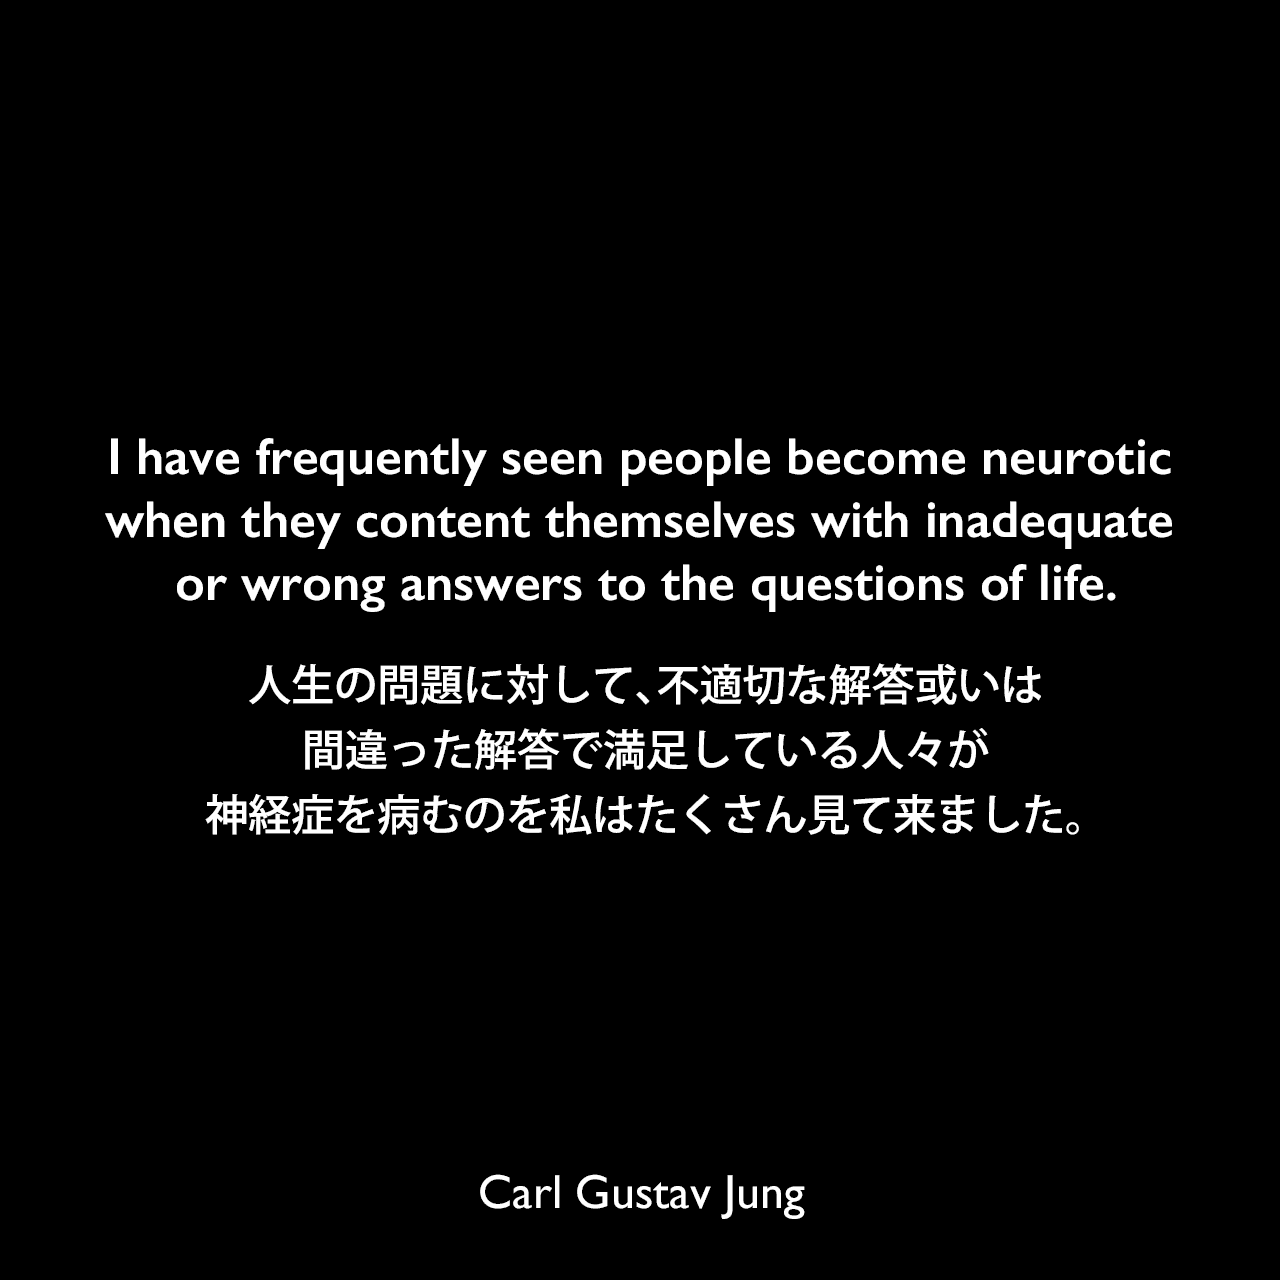 I have frequently seen people become neurotic when they content themselves with inadequate or wrong answers to the questions of life.人生の問題に対して、不適切な解答或いは間違った解答で満足している人々が、神経症を病むのを私はたくさん見て来ました。Carl Gustav Jung